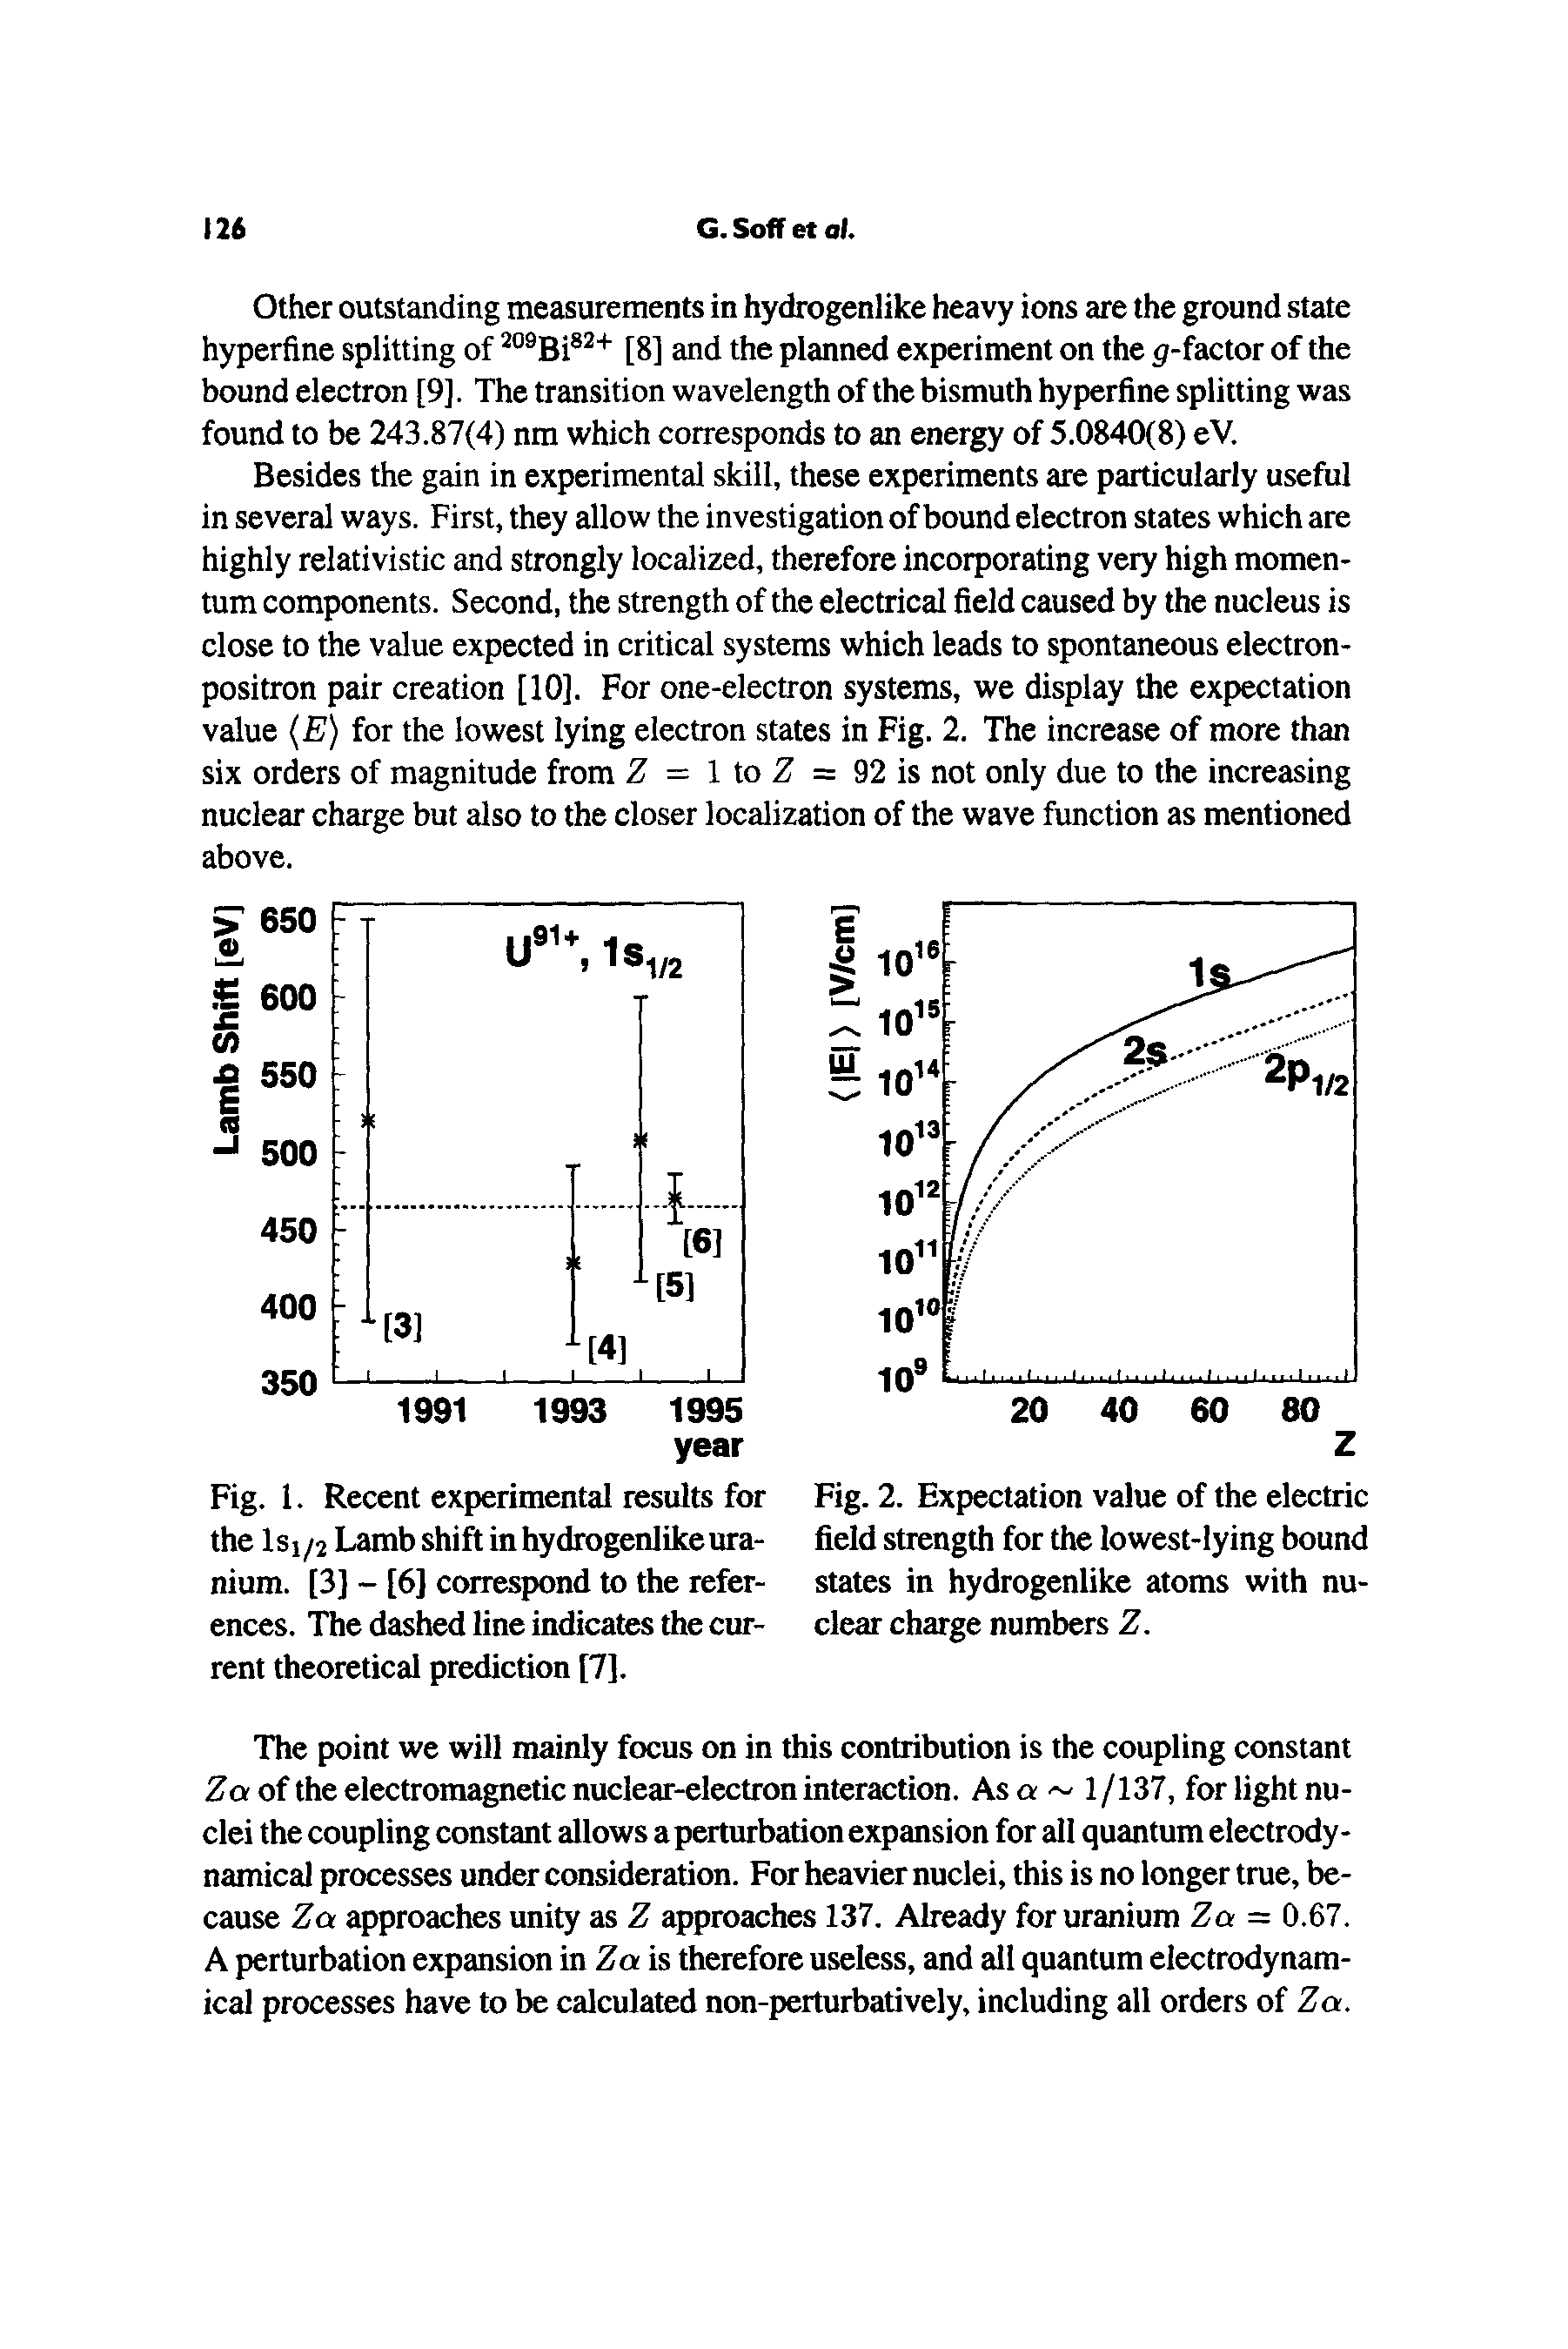 Fig. 2. Expectation value of the electric field strength for the lowest-lying bound states in hydrogenlike atoms with nuclear charge numbers Z.